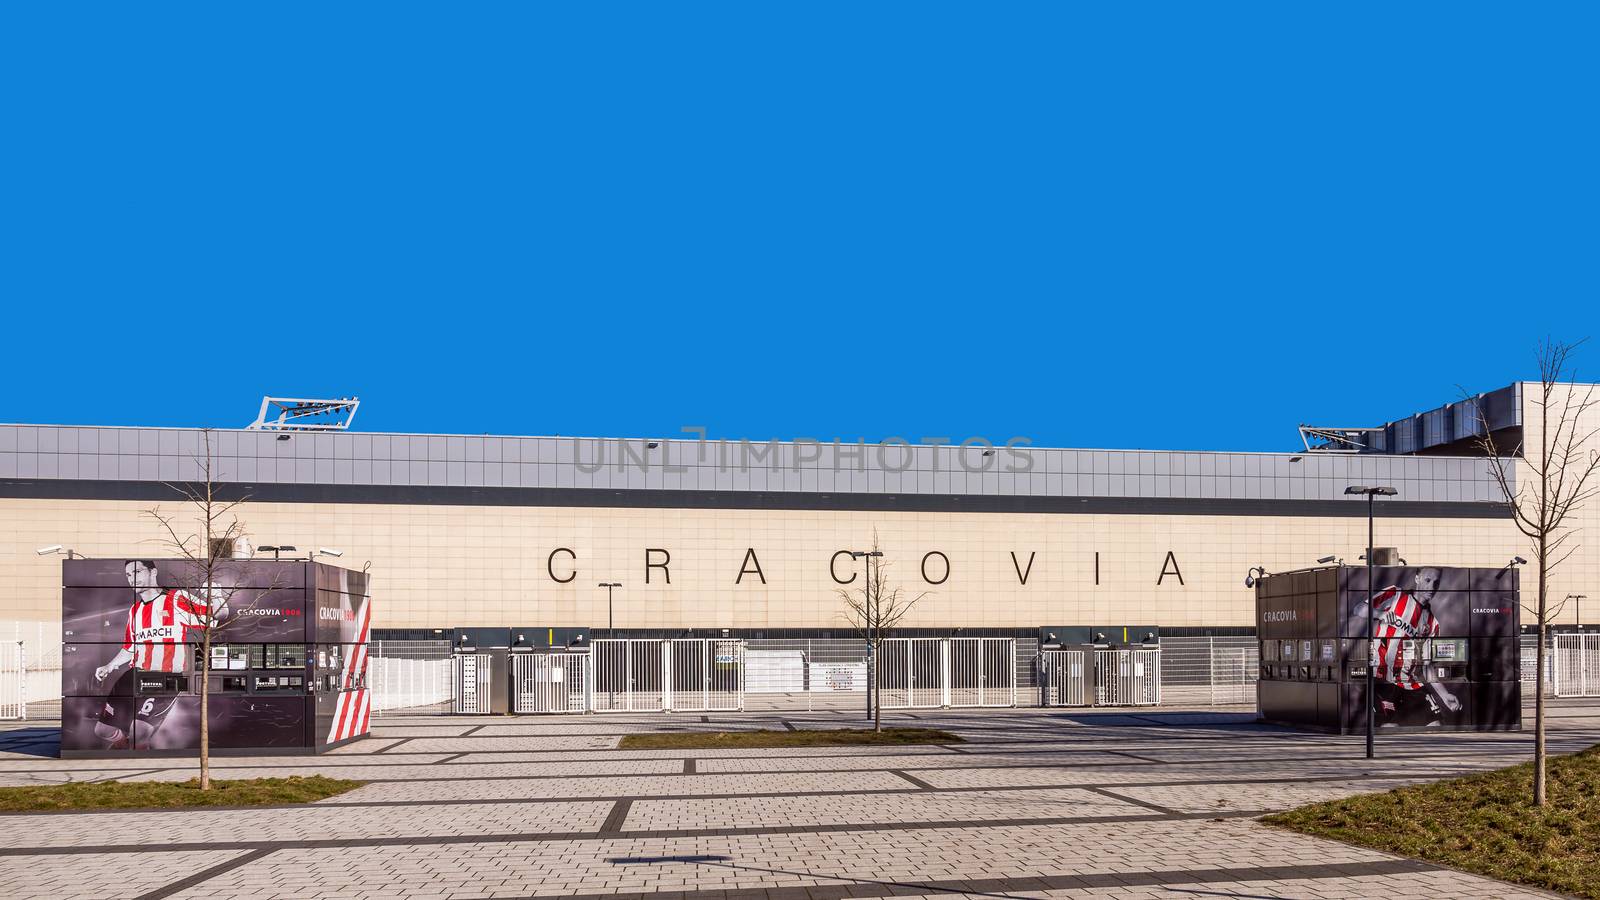 Football stadium of Cracovia in Cracow, the oldest continuously existing Polish sports club, founded in 1906, best known of its men's football section.